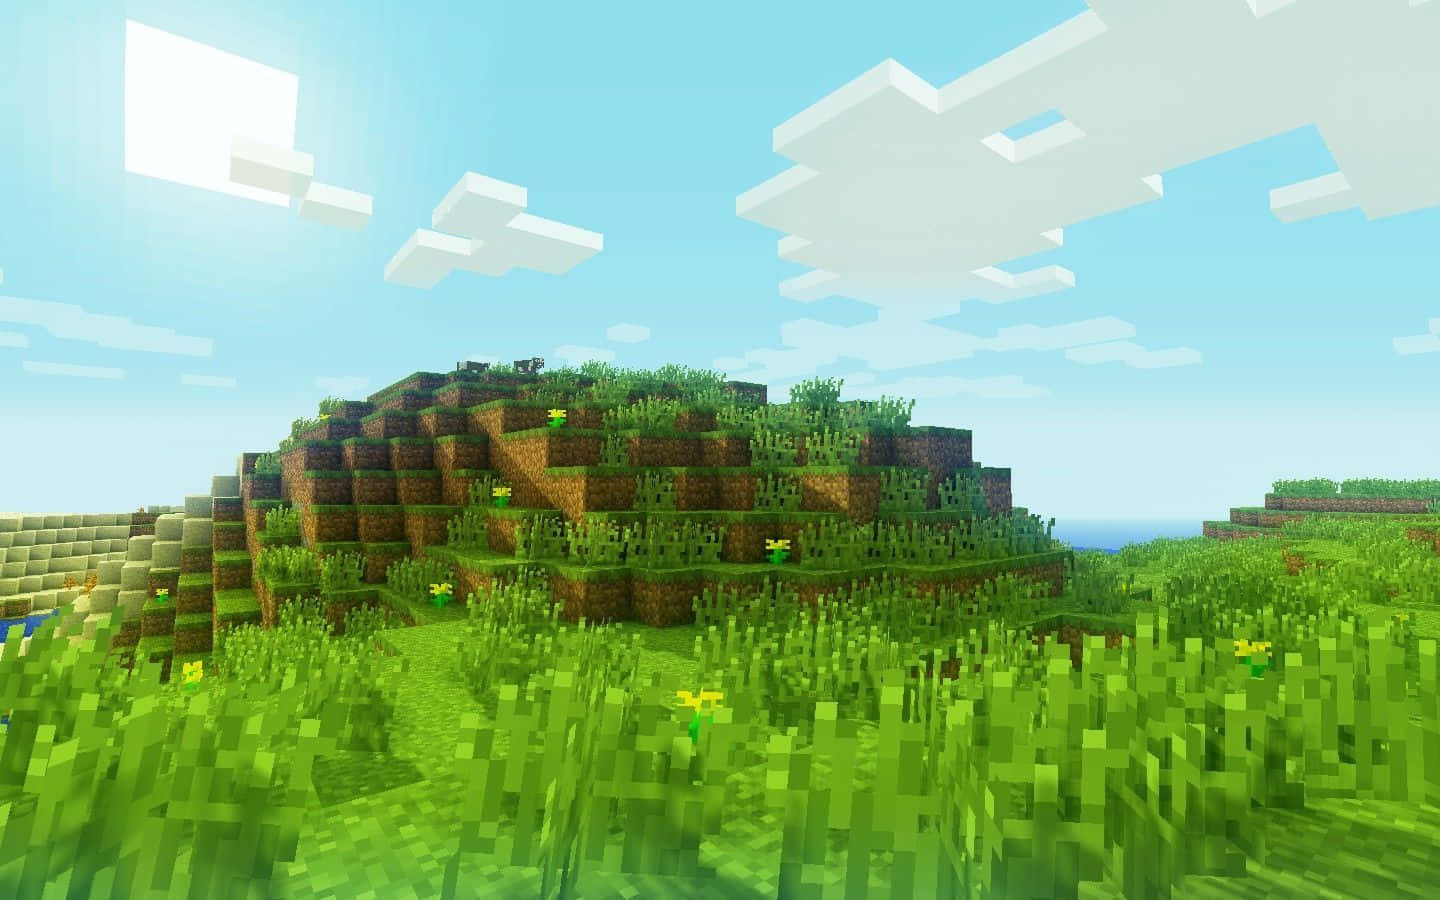 Explore the Minecraft world with this beautifully detailed map Wallpaper